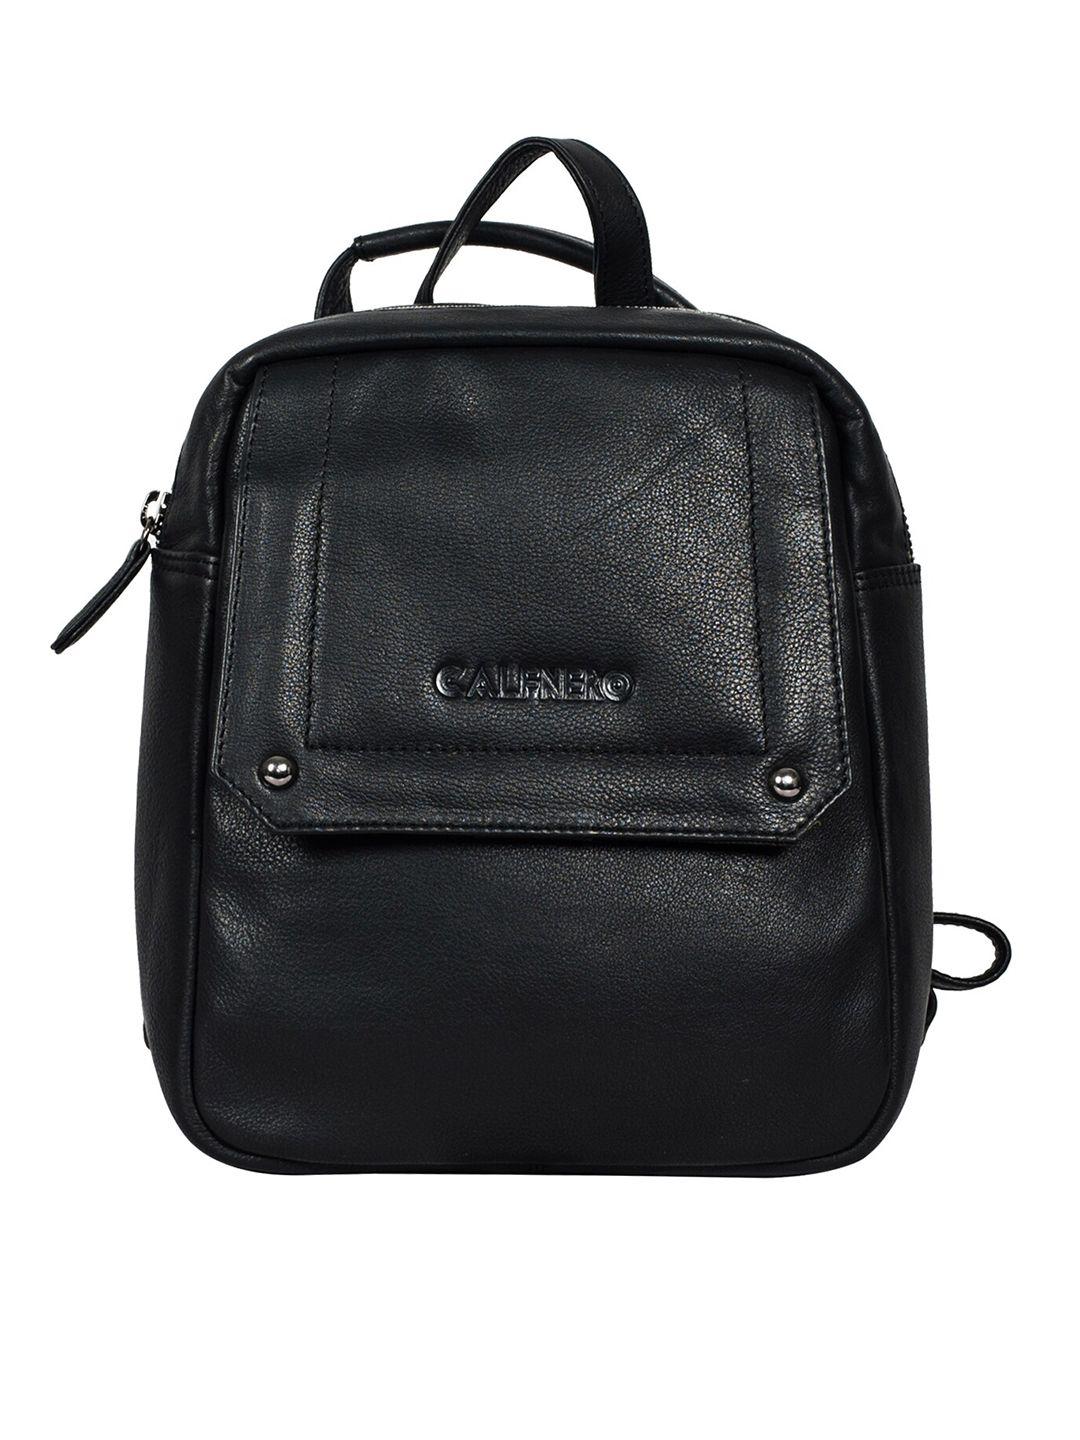 calfnero leather backpack